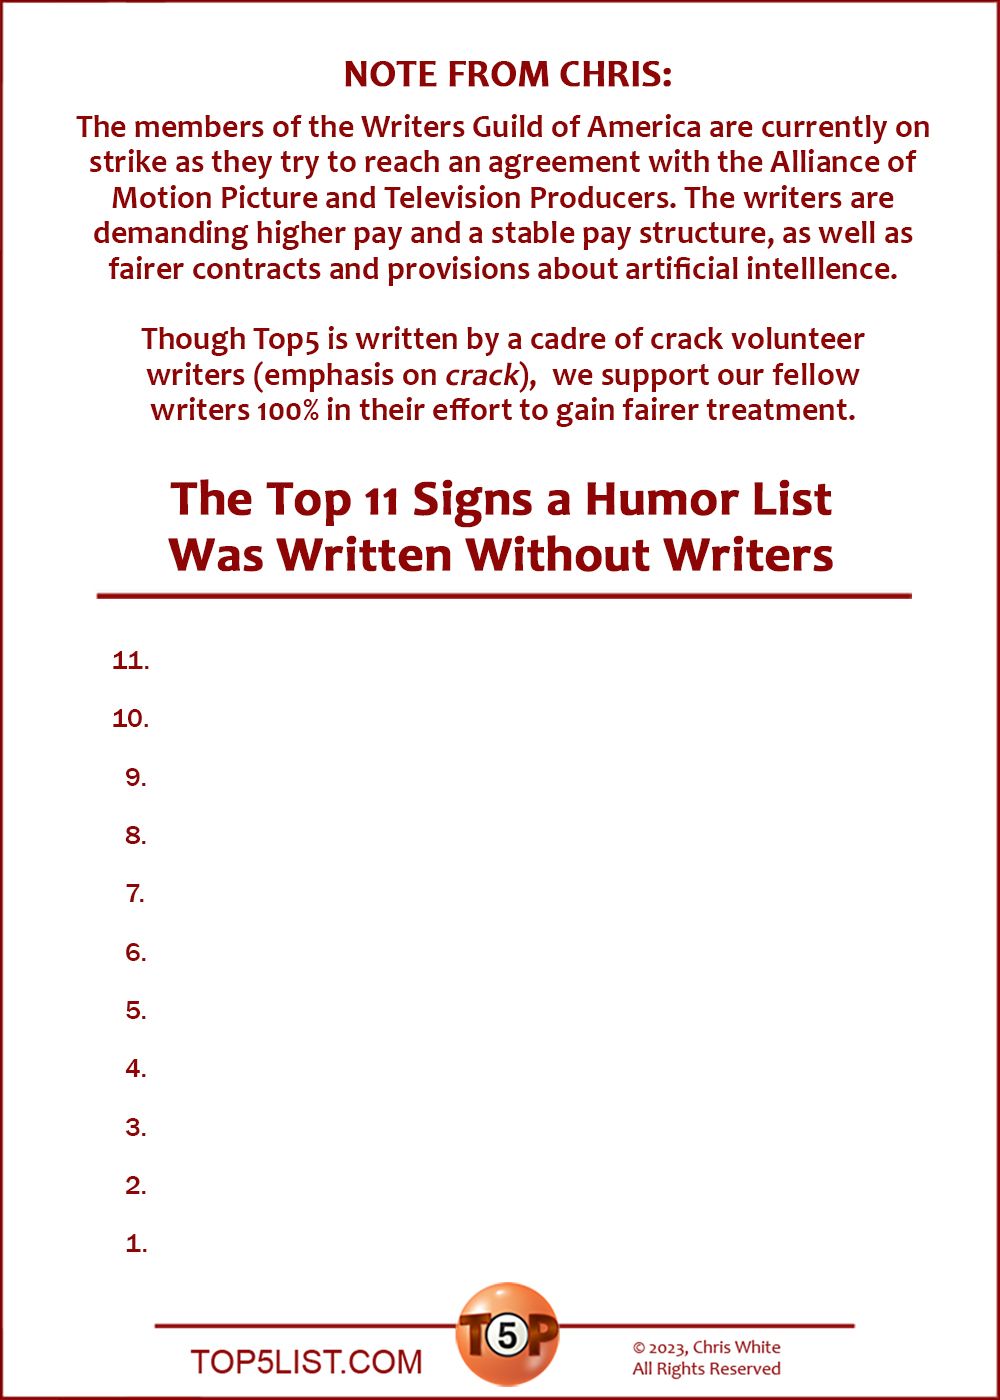 NOTE FROM CHRIS:  The members of the Writers Guild of America are currently on  strike as they try to reach an agreement with the Alliance  of Motion Picture and Television Producers. The writers are  demanding higher pay and a stable pay structure, as well as  fairer contracts and provisions about artificial intelllence.   Though Top5 is written by a cadre of crack volunteer writers (emphasis on crack),  we support our fellow writers 100% in their effort to gain fairer treatment.   The Top 11 Signs a Humor List Was Written Without Writers  11. [This space left intentionally blank.]  10. [This space left intentionally blank.]   9. [This space left intentionally blank.]   8. [This space left intentionally blank.]   7. [This space left intentionally blank.]   6. [This space left intentionally blank.]   5. [This space left intentionally blank.]   4. [This space left intentionally blank.]   3. [This space left intentionally blank.]   2. [This space left intentionally blank.]  And the number 1 Sign a Humor List Was Written Without Writers...   1. [You guessed it. This space left intentionally blank.]